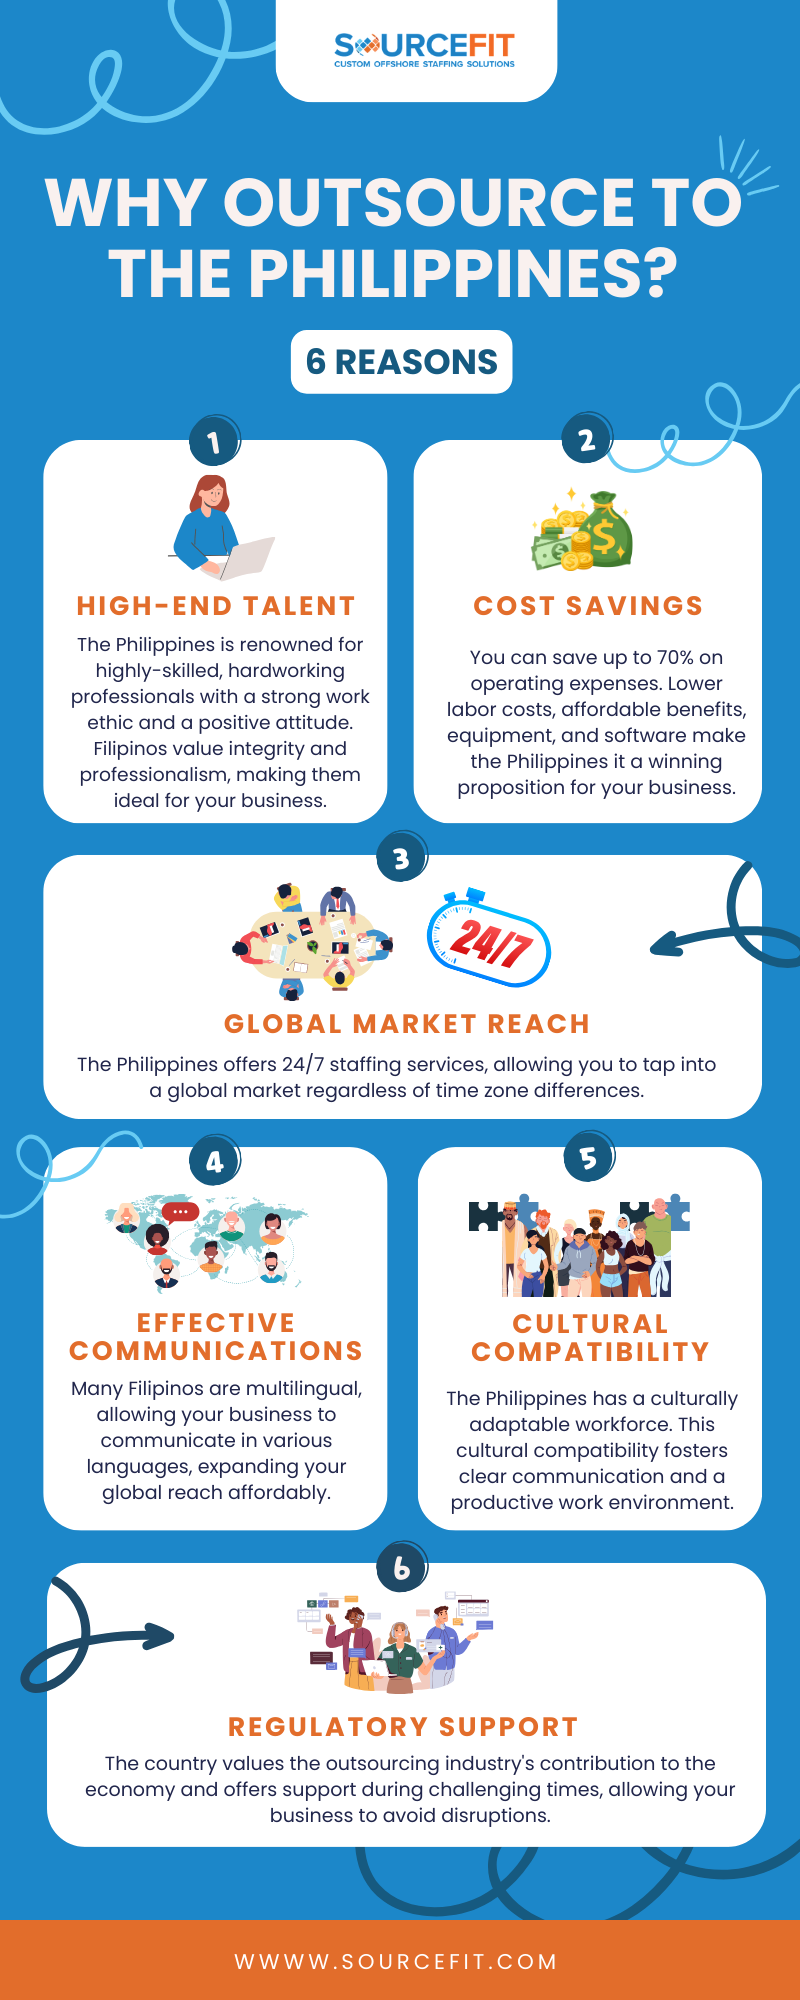 Why smart businesses are outsourcing to the Philippines - Sourcefit